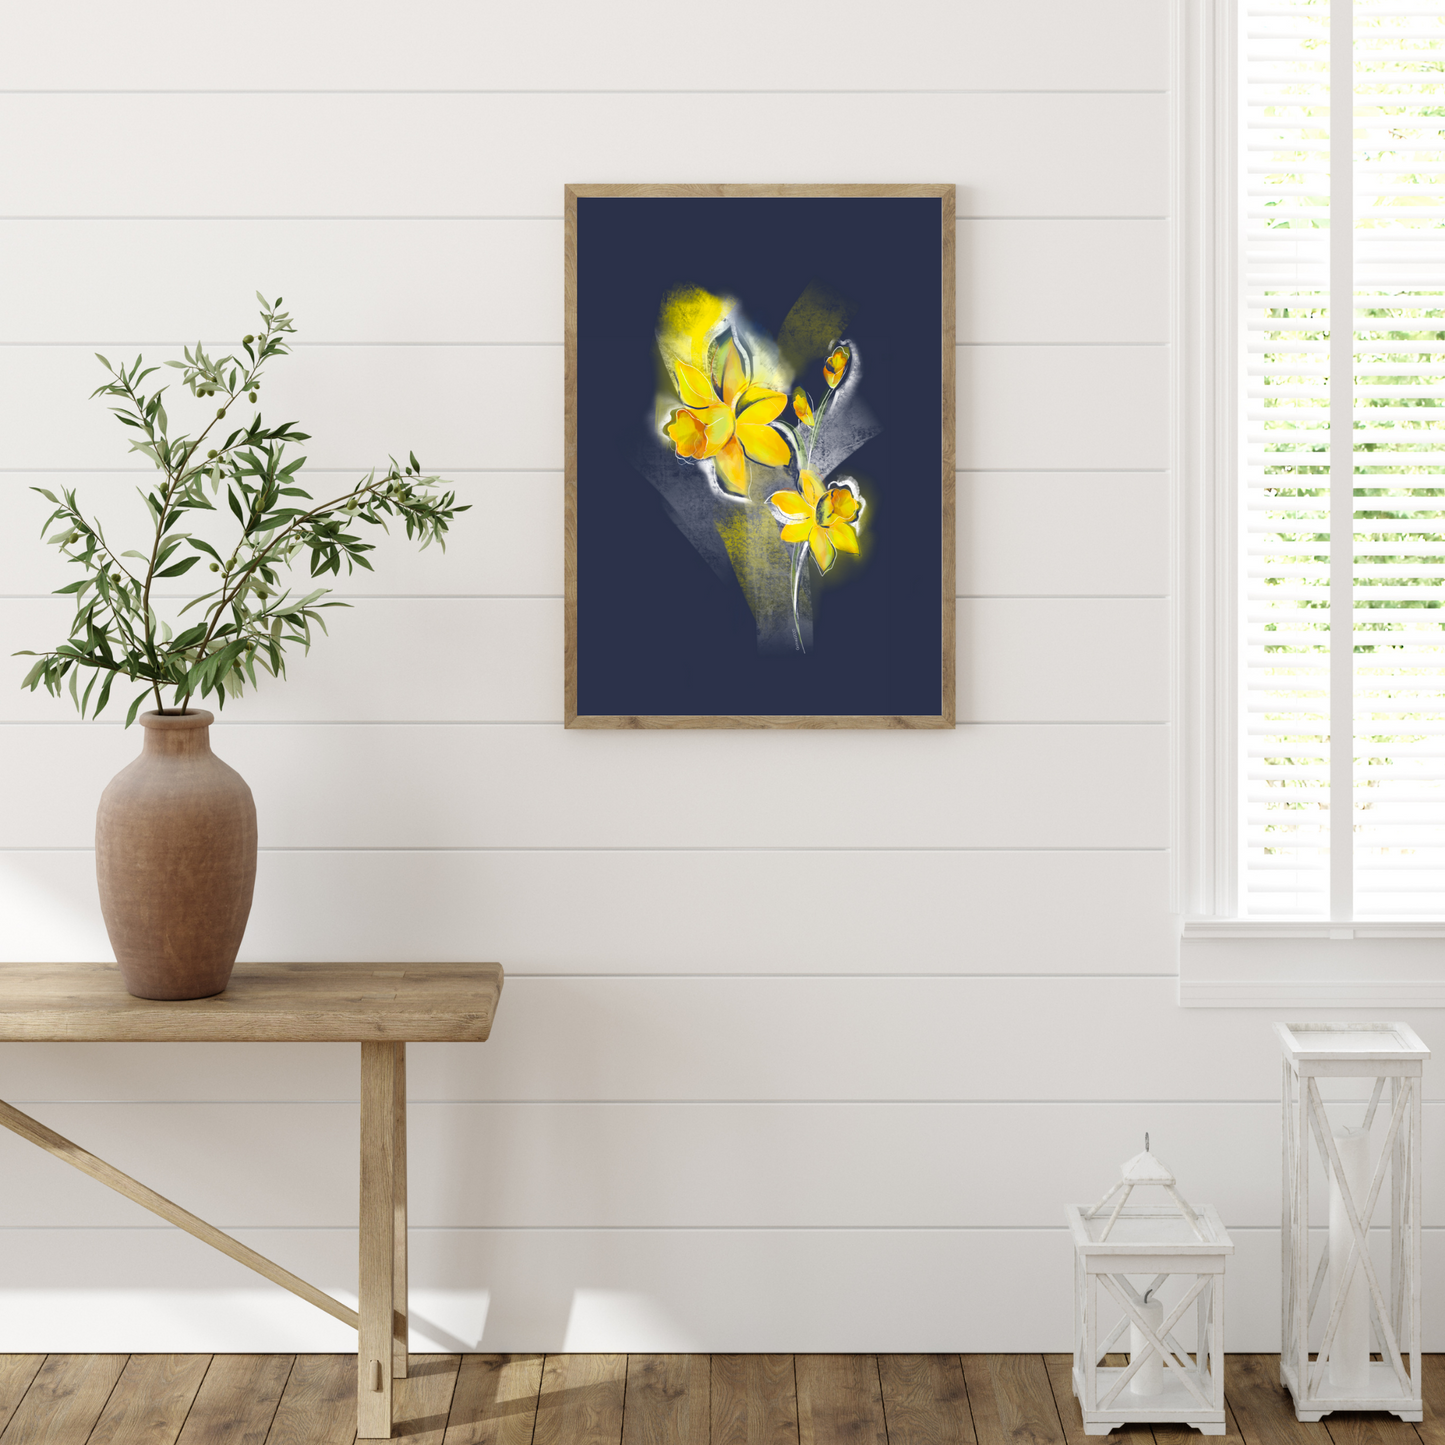 An example of the Daffodil painting by ArisaTeam over a bench